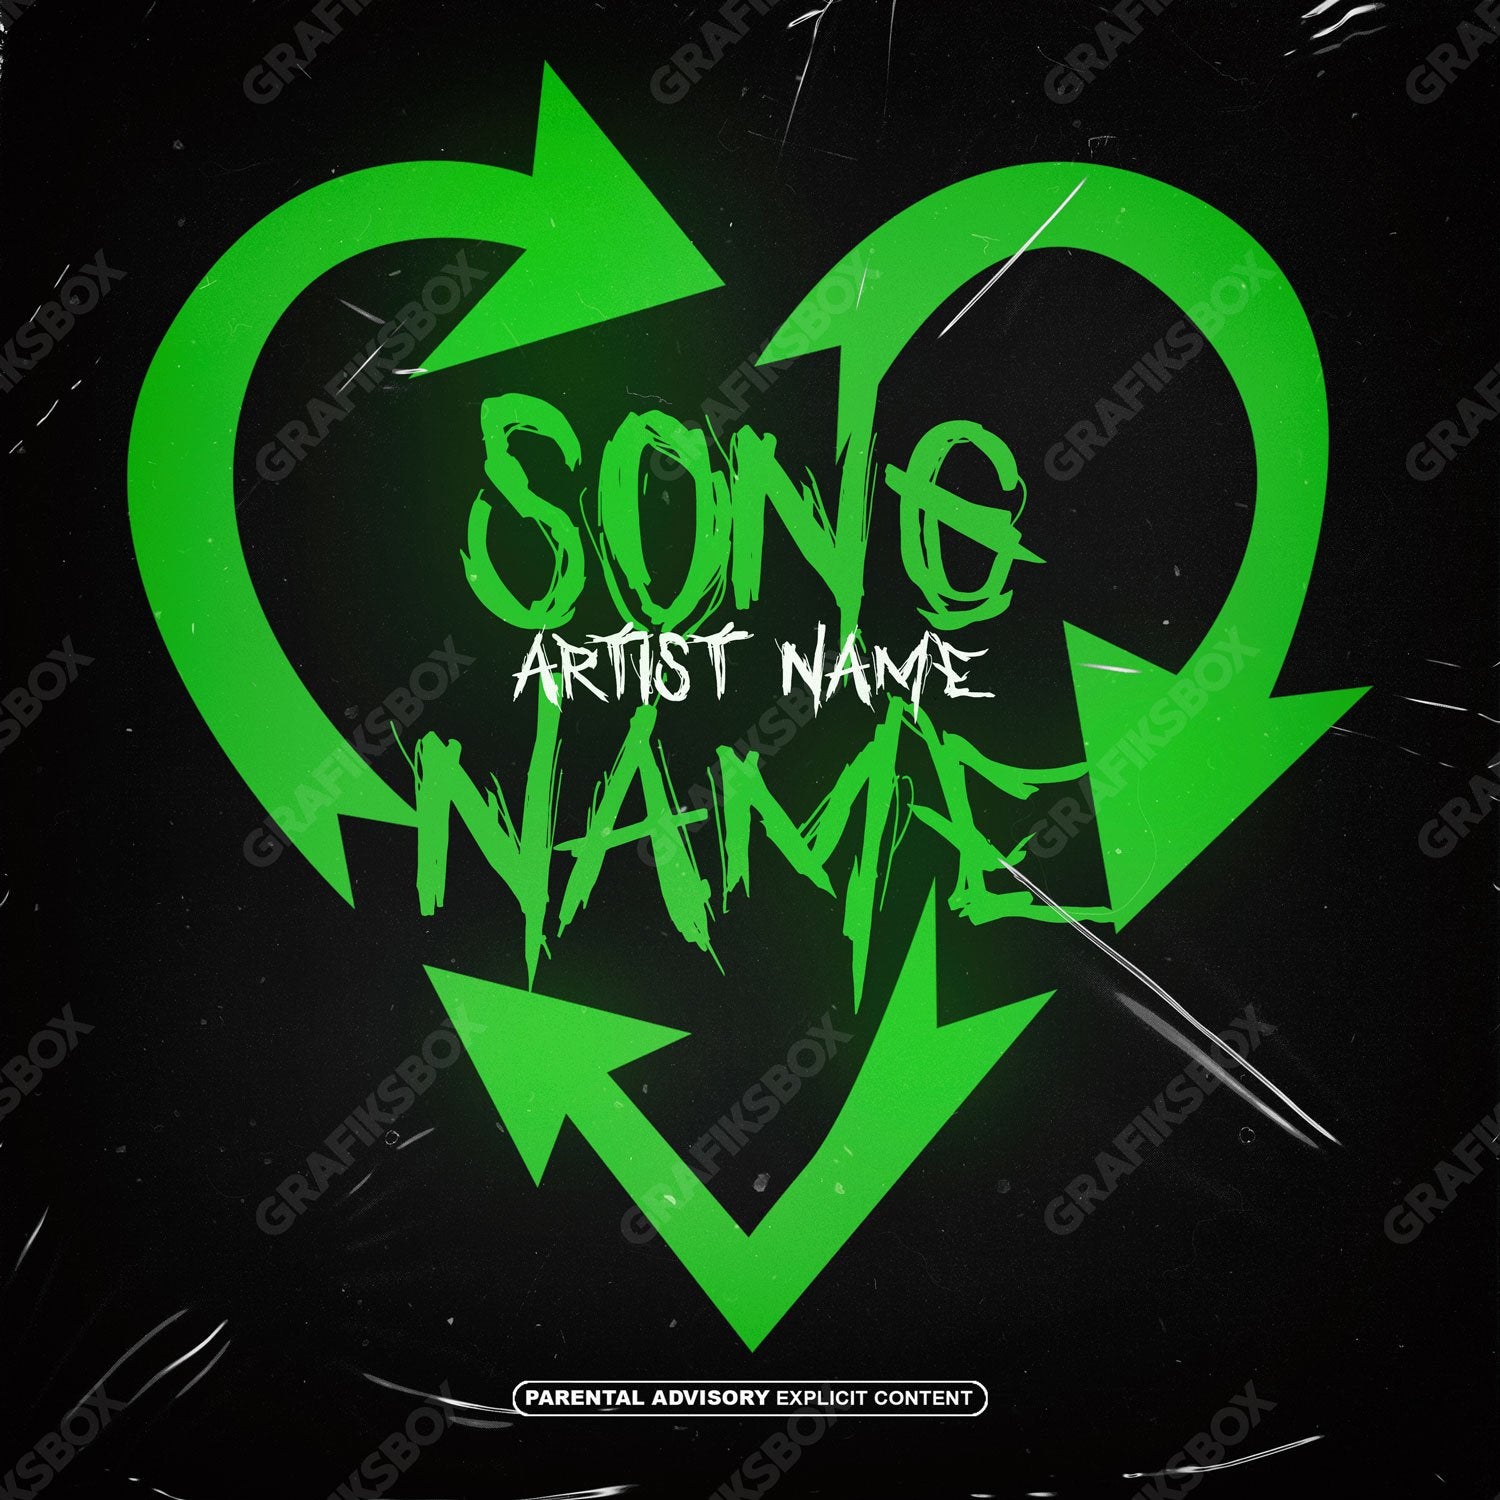 Recycled Love premade cover art